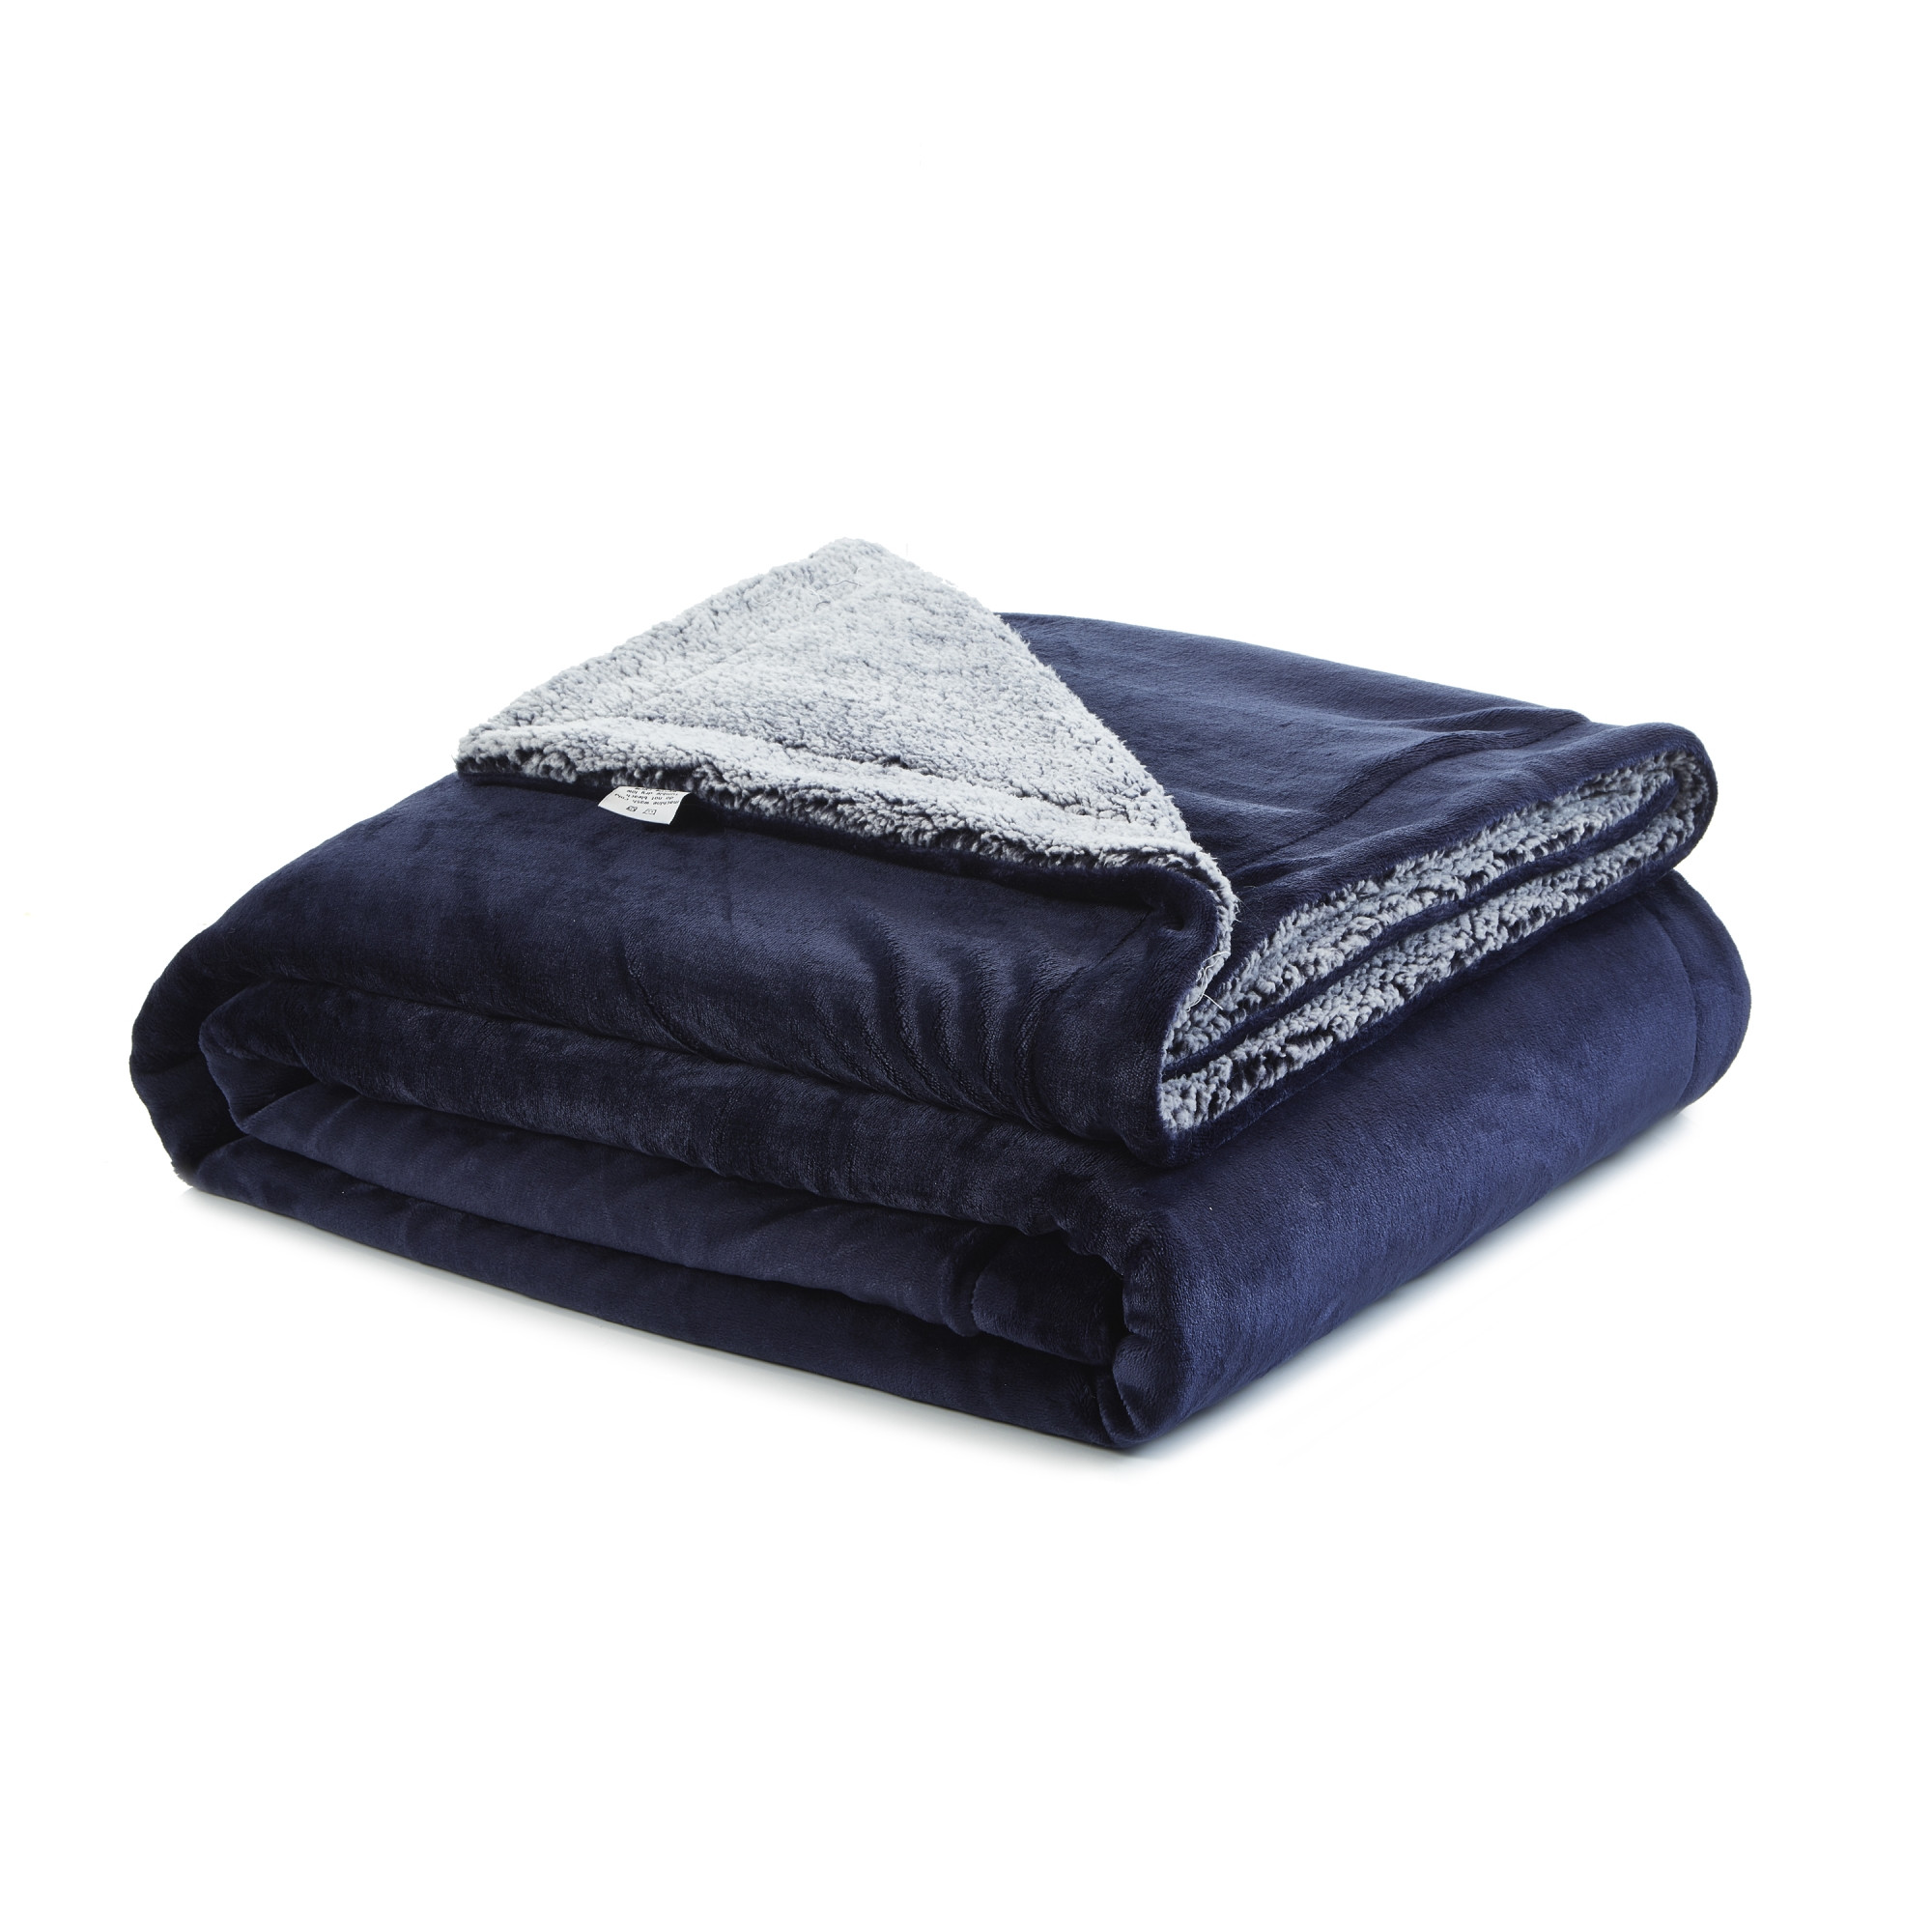 Navy Blue Knitted PolYester Solid Color Plush King Blanket-531199-1